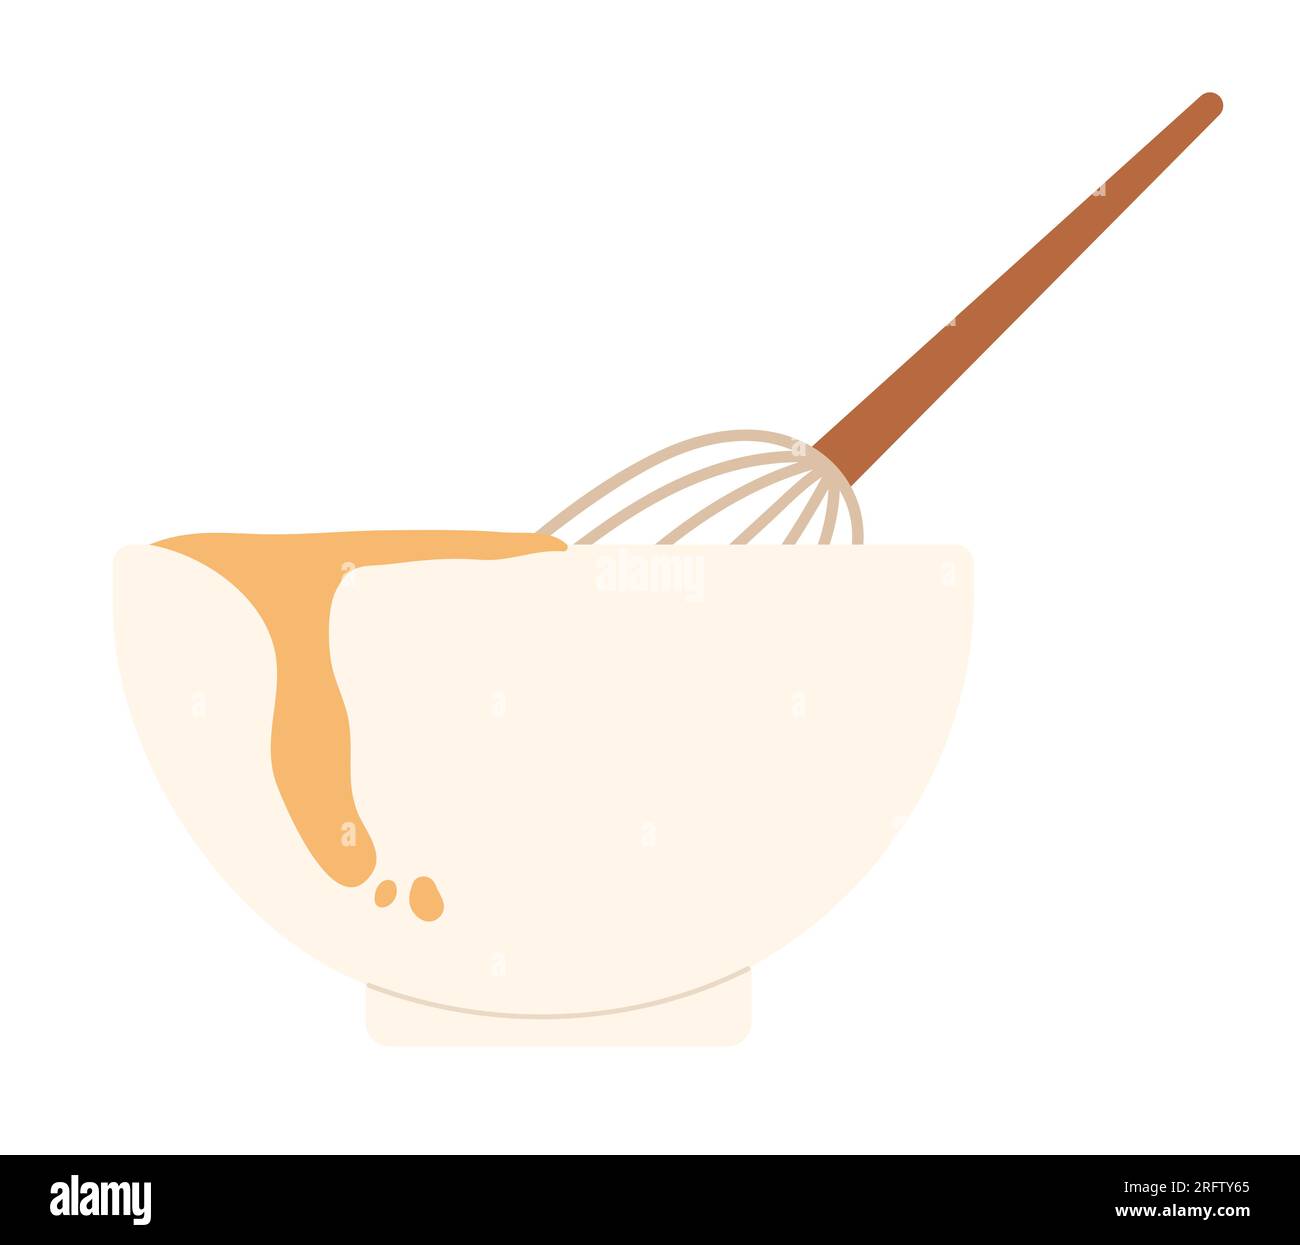 https://c8.alamy.com/comp/2RFTY65/mixing-bowl-with-whisk-mixing-ingredients-cooking-bakery-bowl-vector-illustration-2RFTY65.jpg